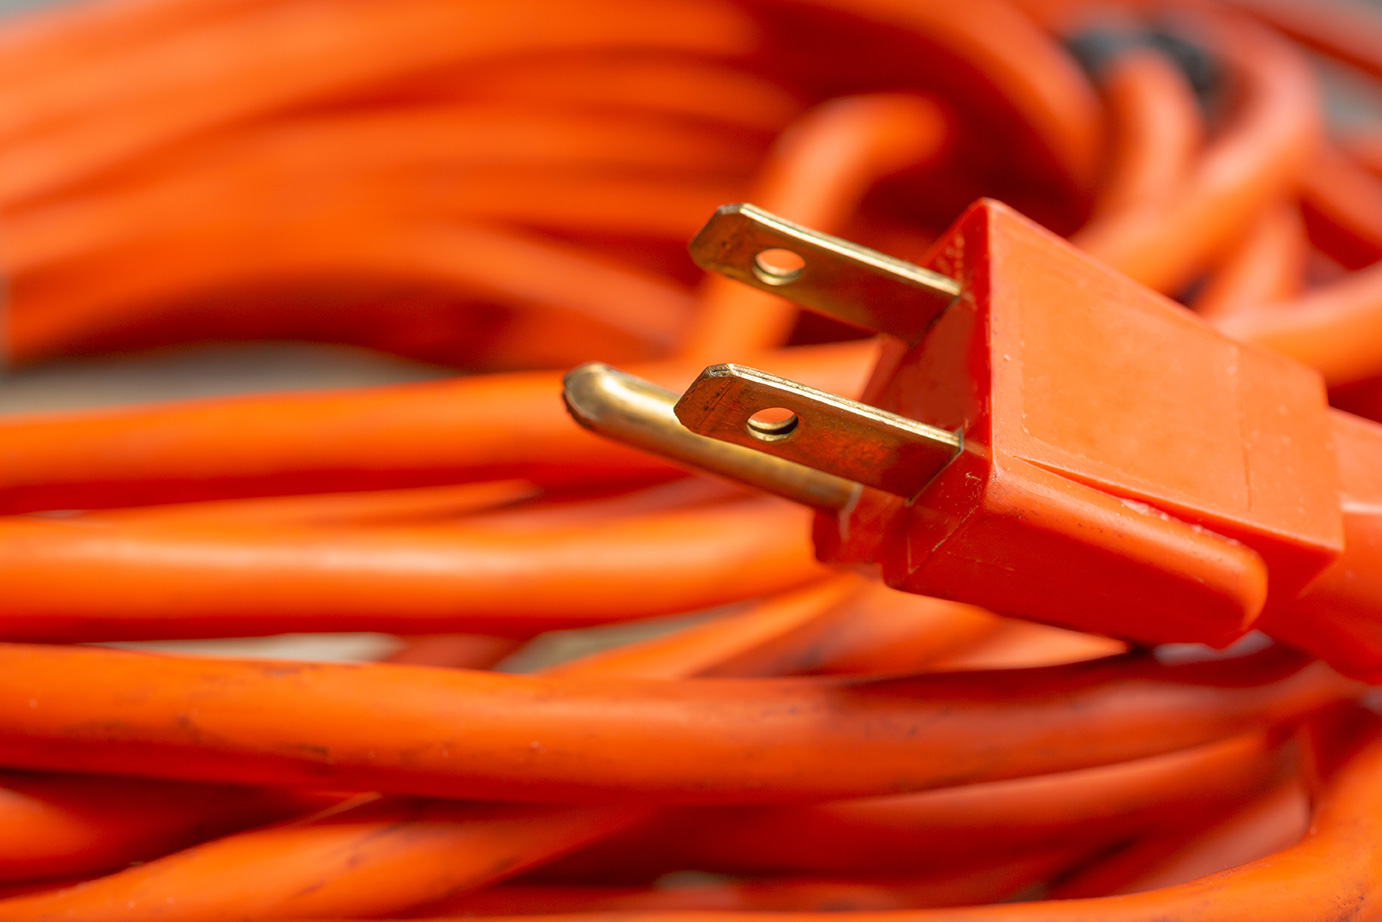 Whether it's for your personal work garage or a jobsite, USW cord